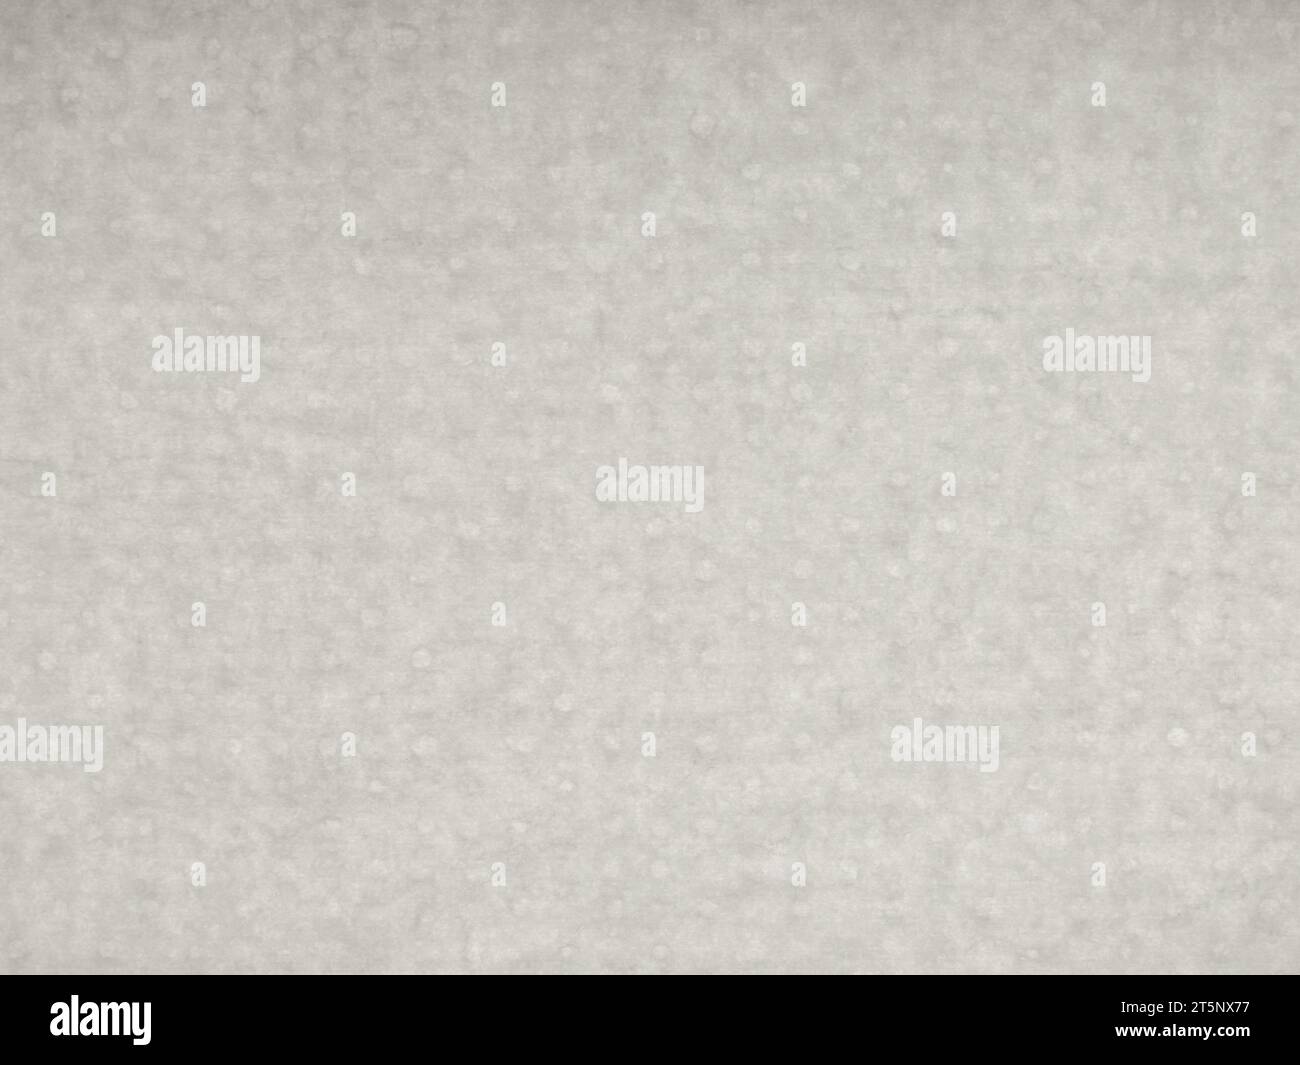 Packing gray spotted paper sheet. Subtle texture. Low contrast pattern. Stock Photo